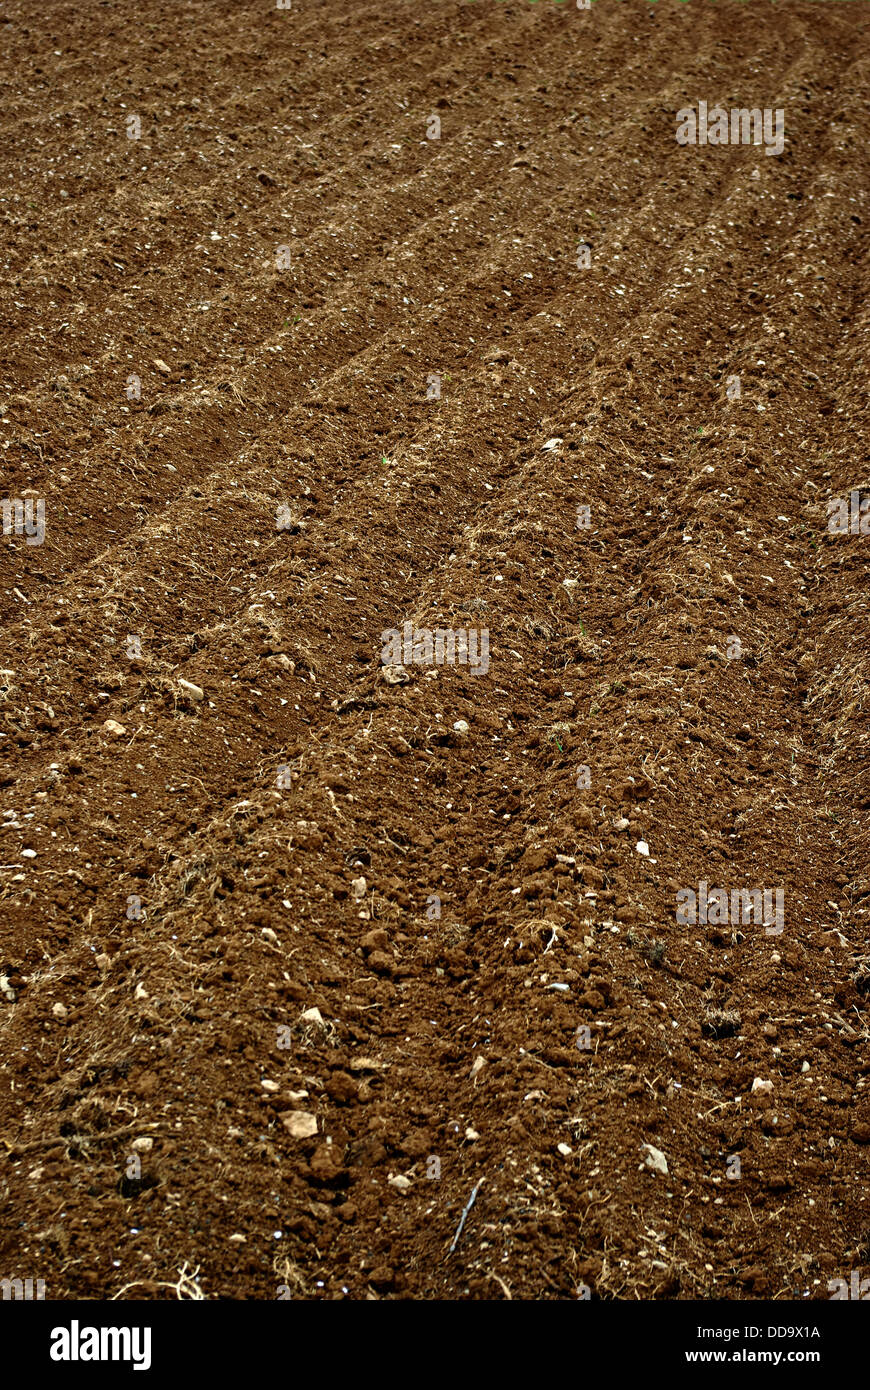 The furrows in the field of arable land ready for spring planting. Stock Photo